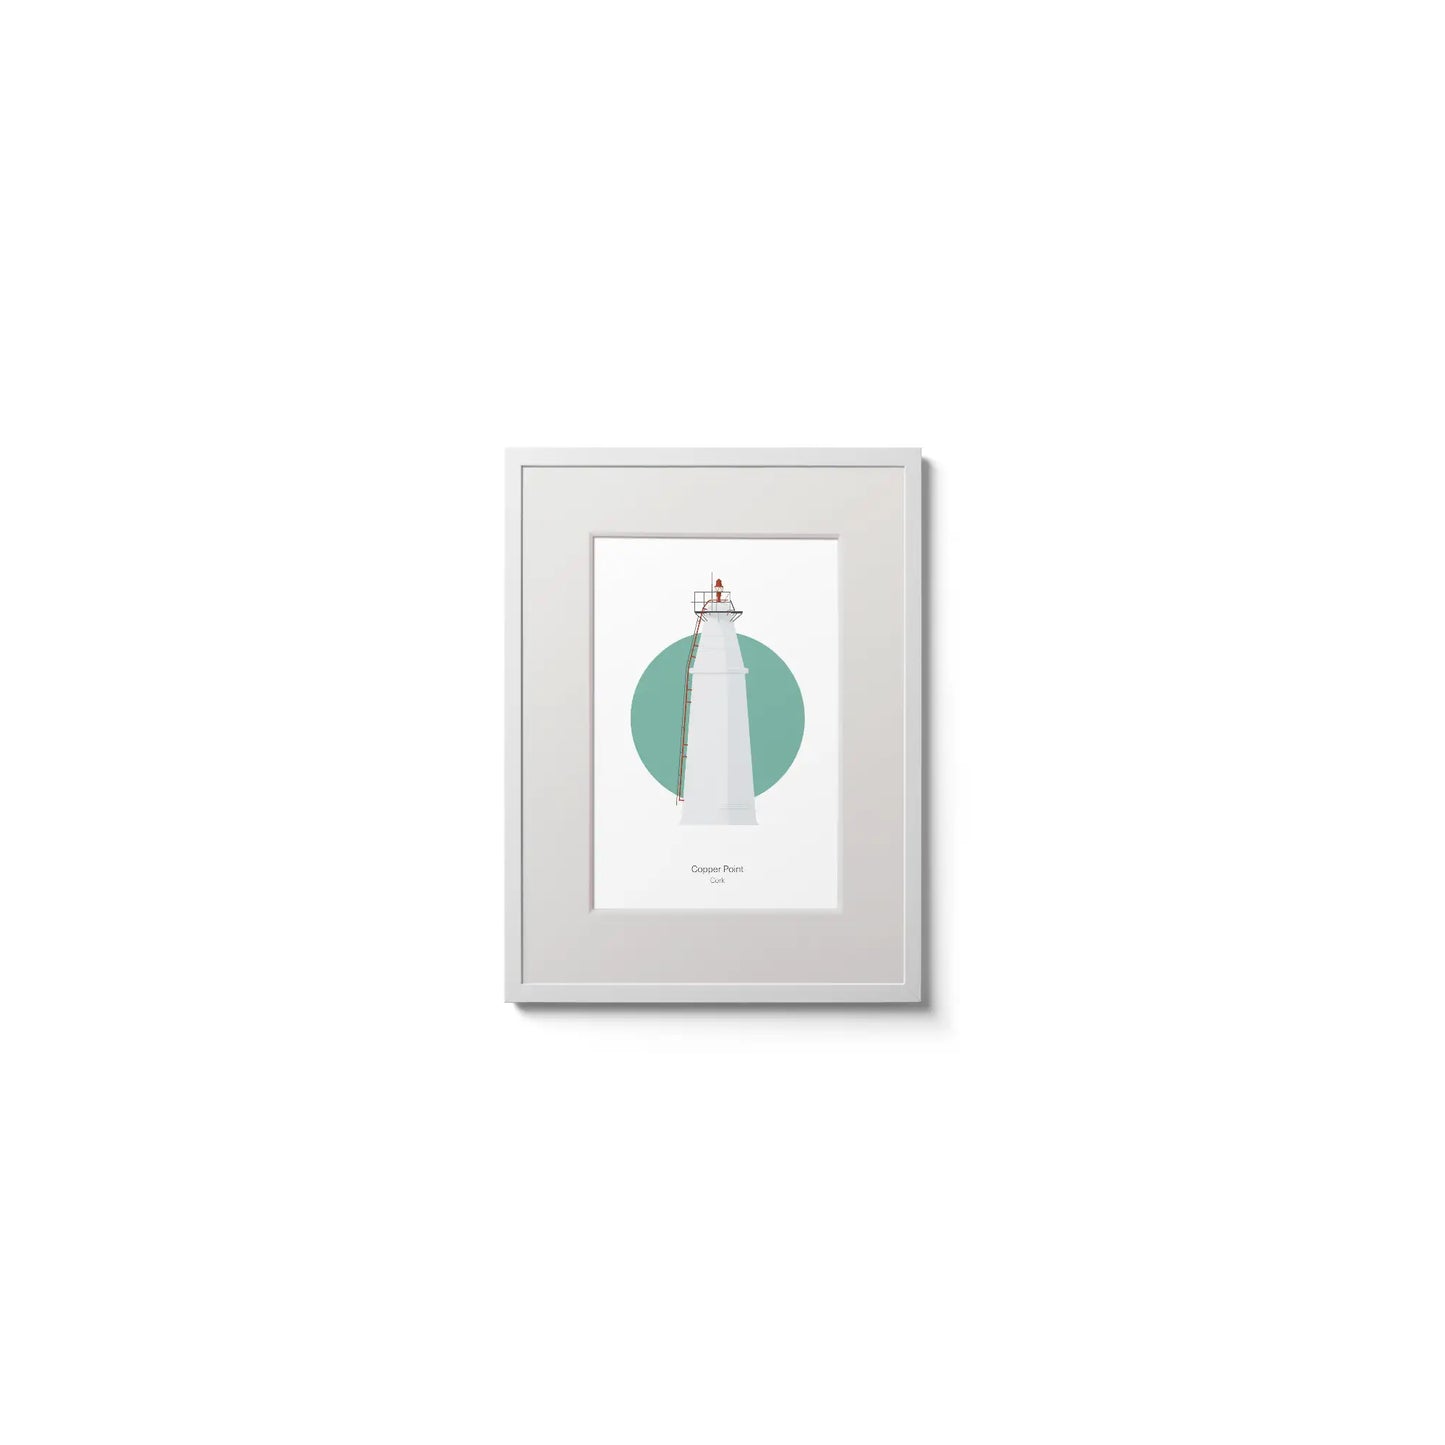 Contemporary wall hanging of Copper Point lighthouse on a white background inside light blue square,  in a white frame measuring 15x20cm.